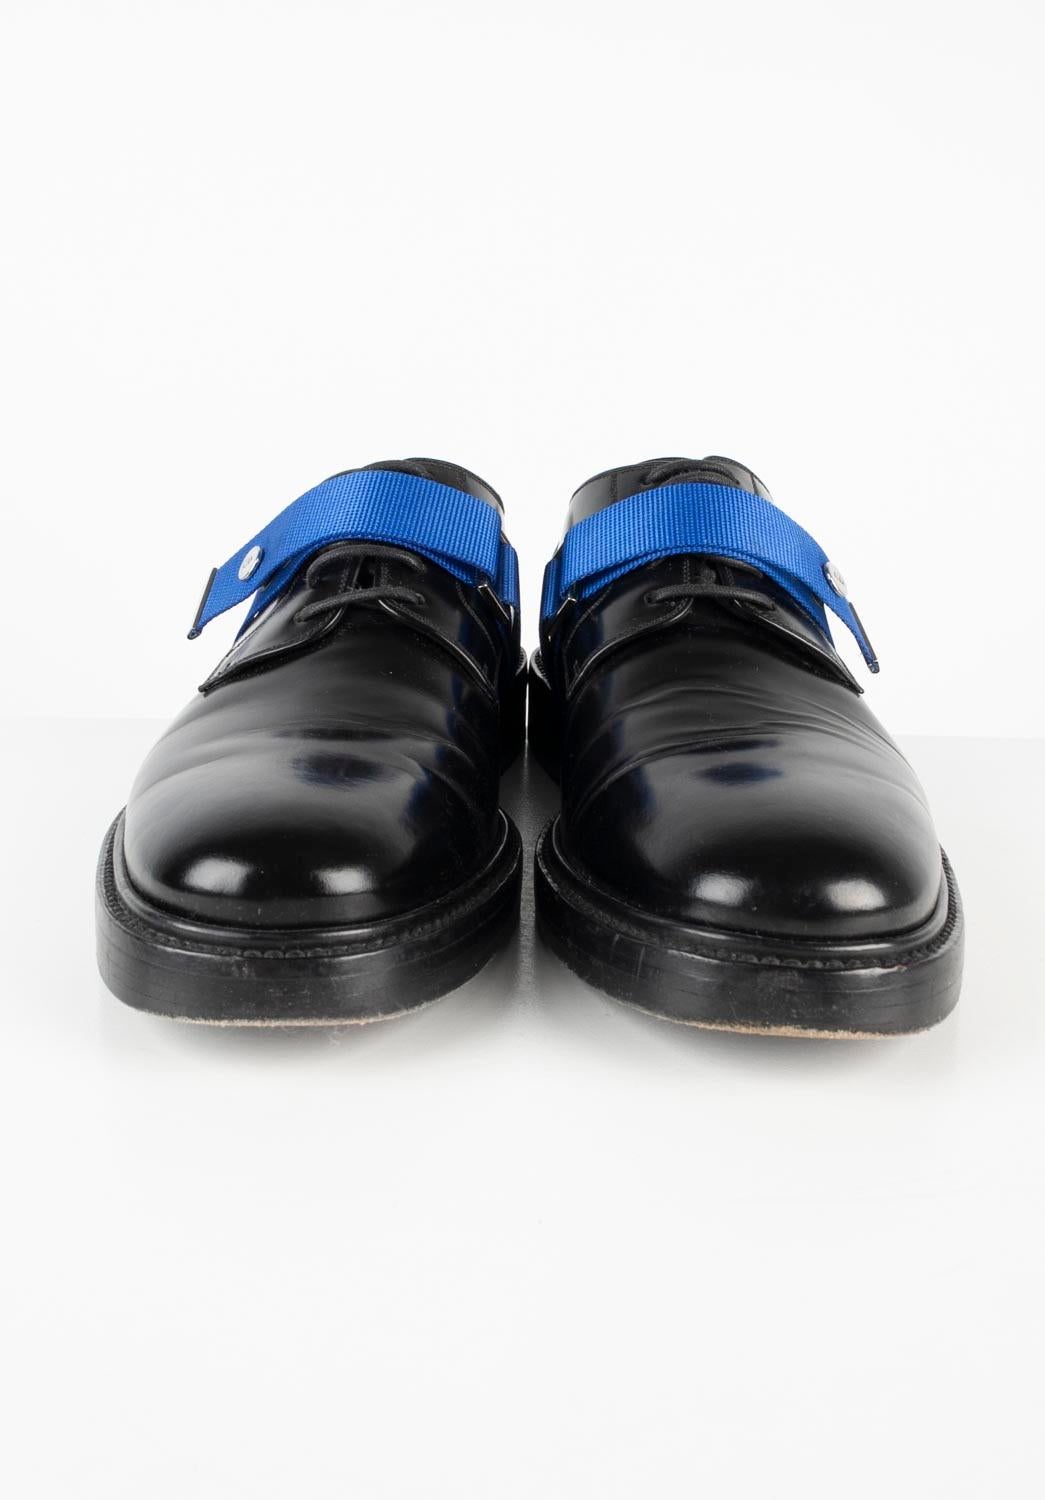 Item for sale is 100% genuine Dior Homme AW15 Men Shoes, S693
Color: black
(An actual color may a bit vary due to individual computer screen interpretation)
Material: 100% patent leather
Tag size: 40 ½, USA7, UK6
These shoes are great quality item.